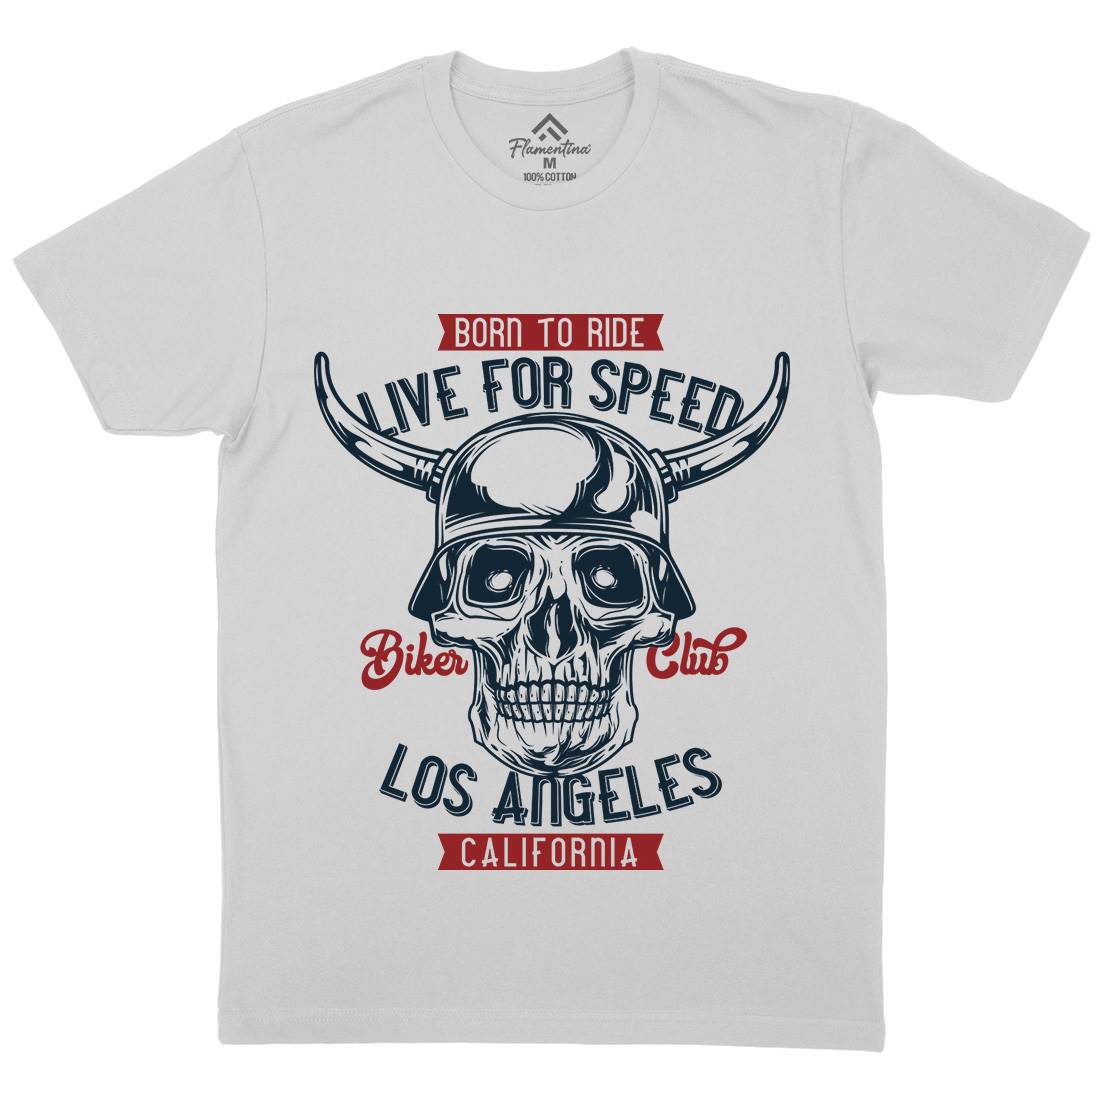 Live For Speed Mens Crew Neck T-Shirt Motorcycles B851